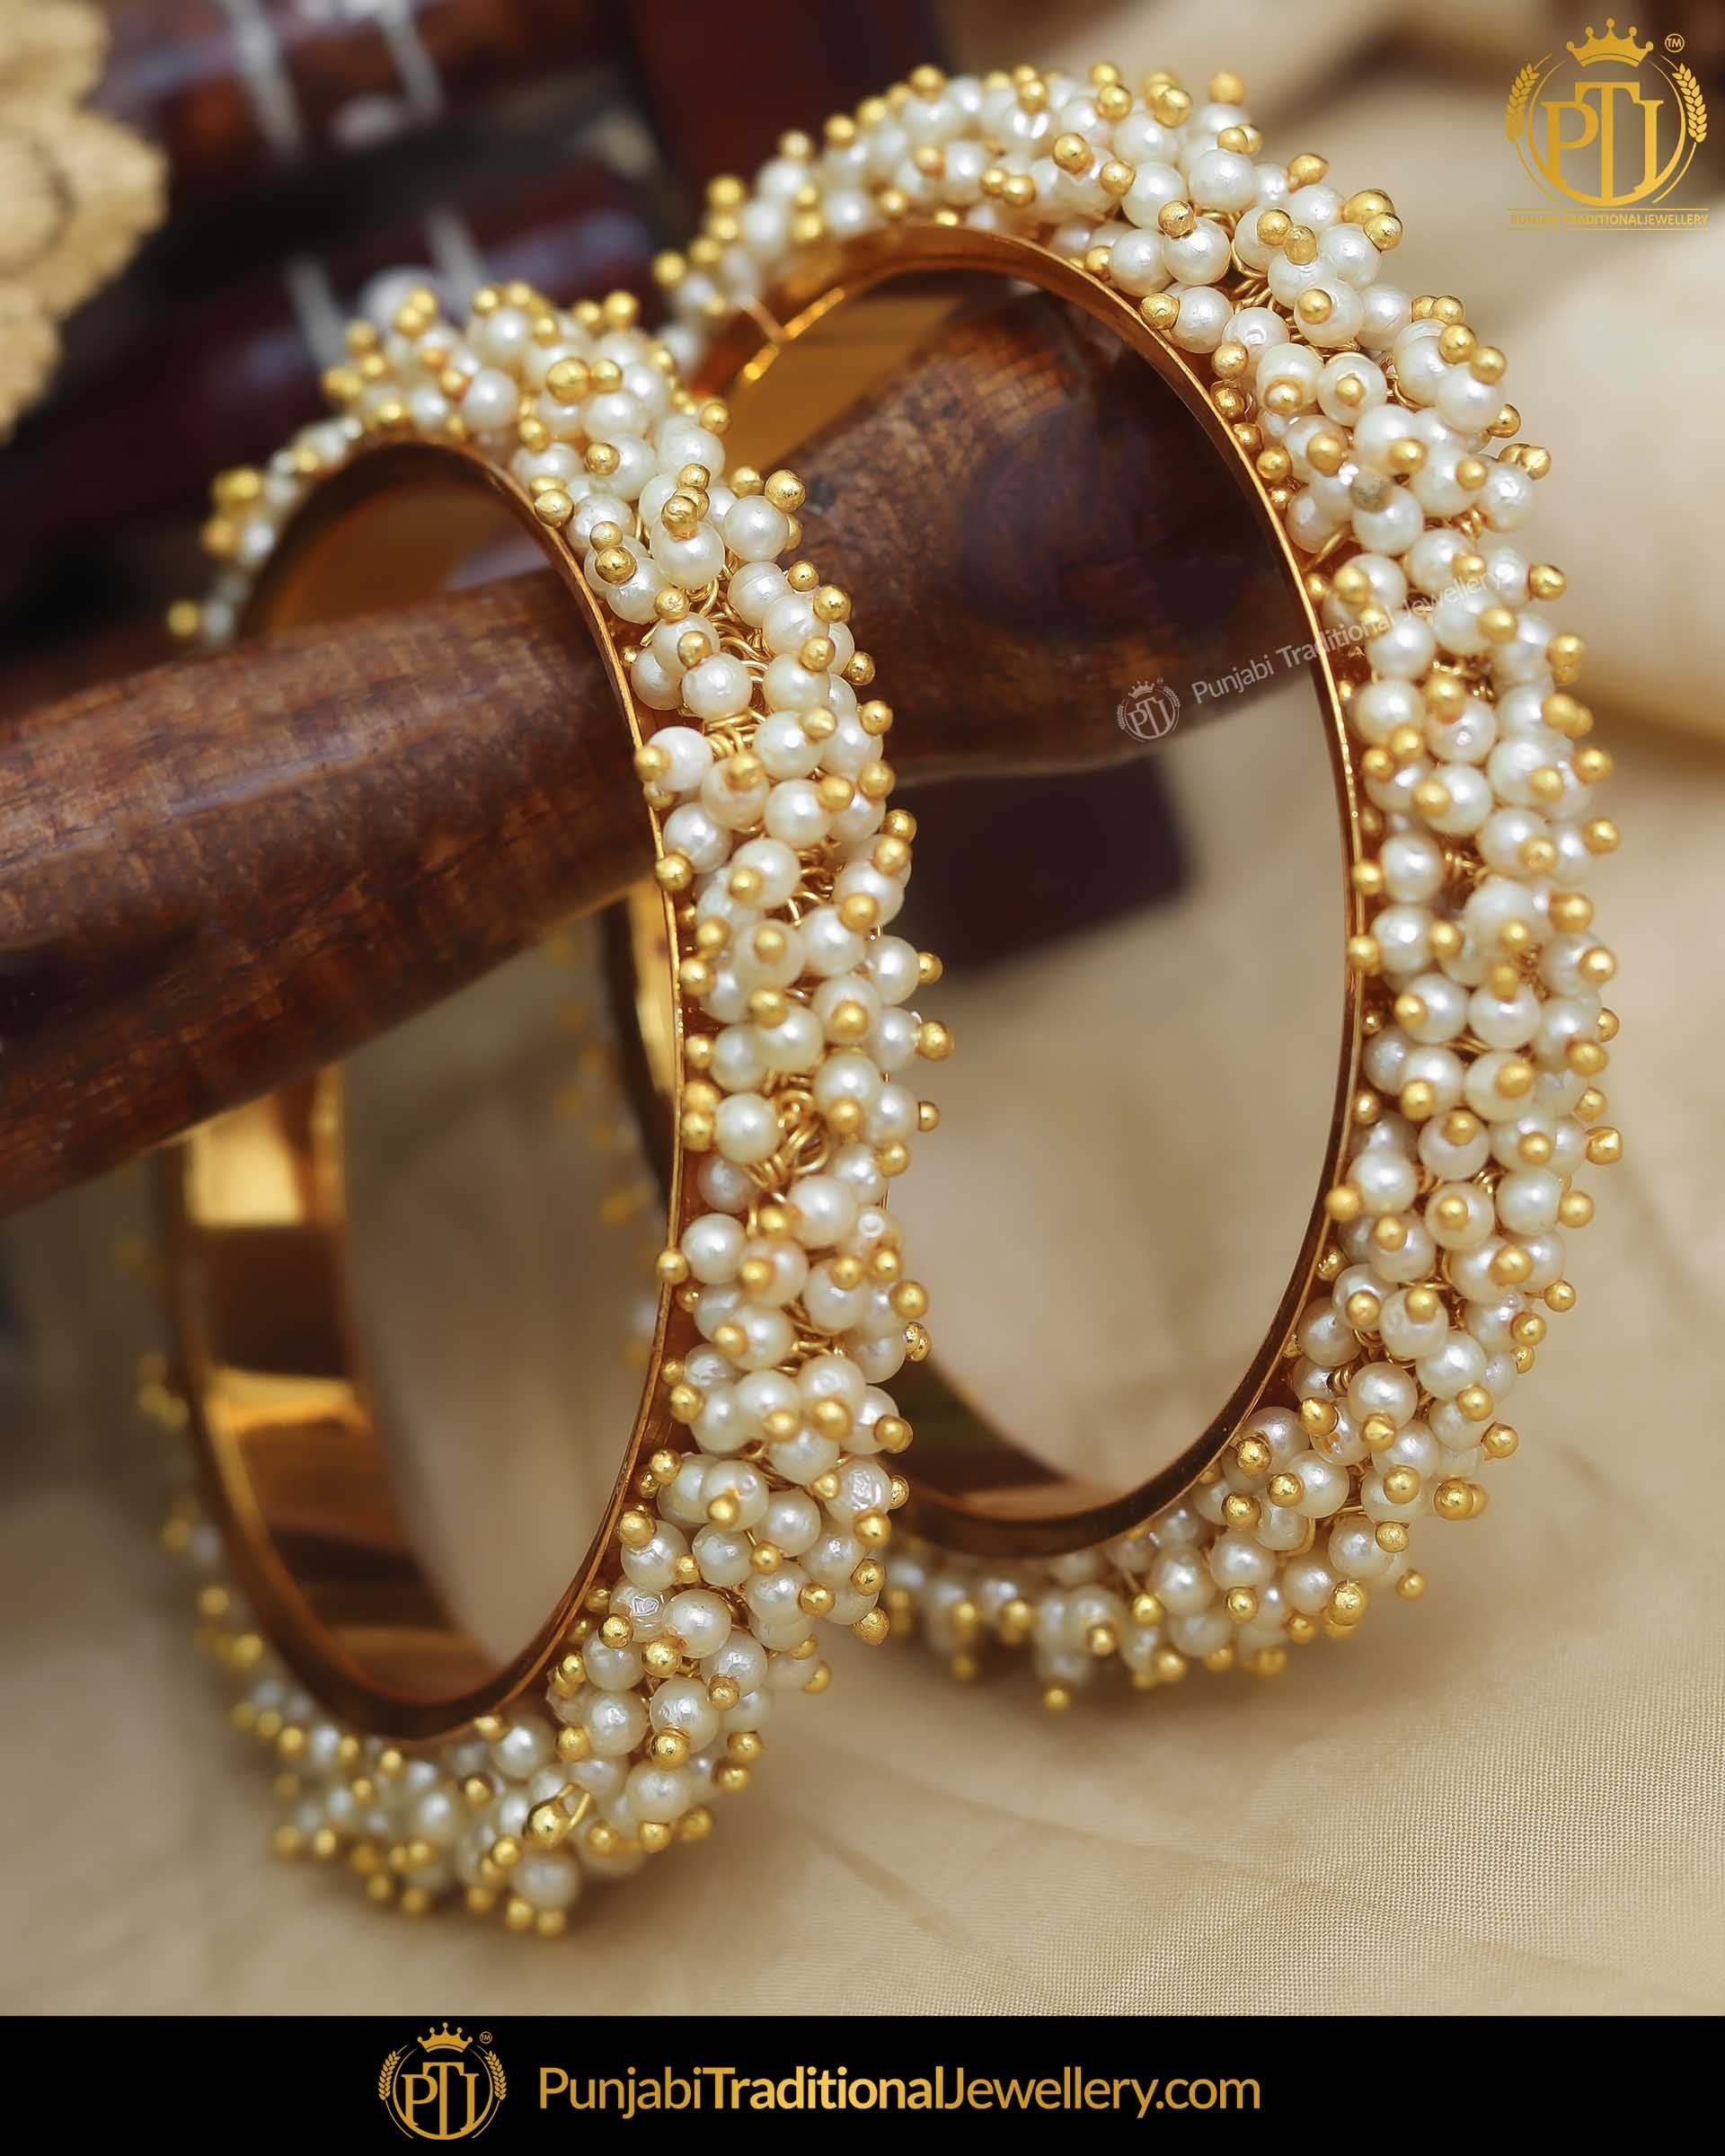 Antique Gold Finished Pearl Karra Bangles (Both Hand Pair) | Punjabi Traditional Jewellery Exclusive